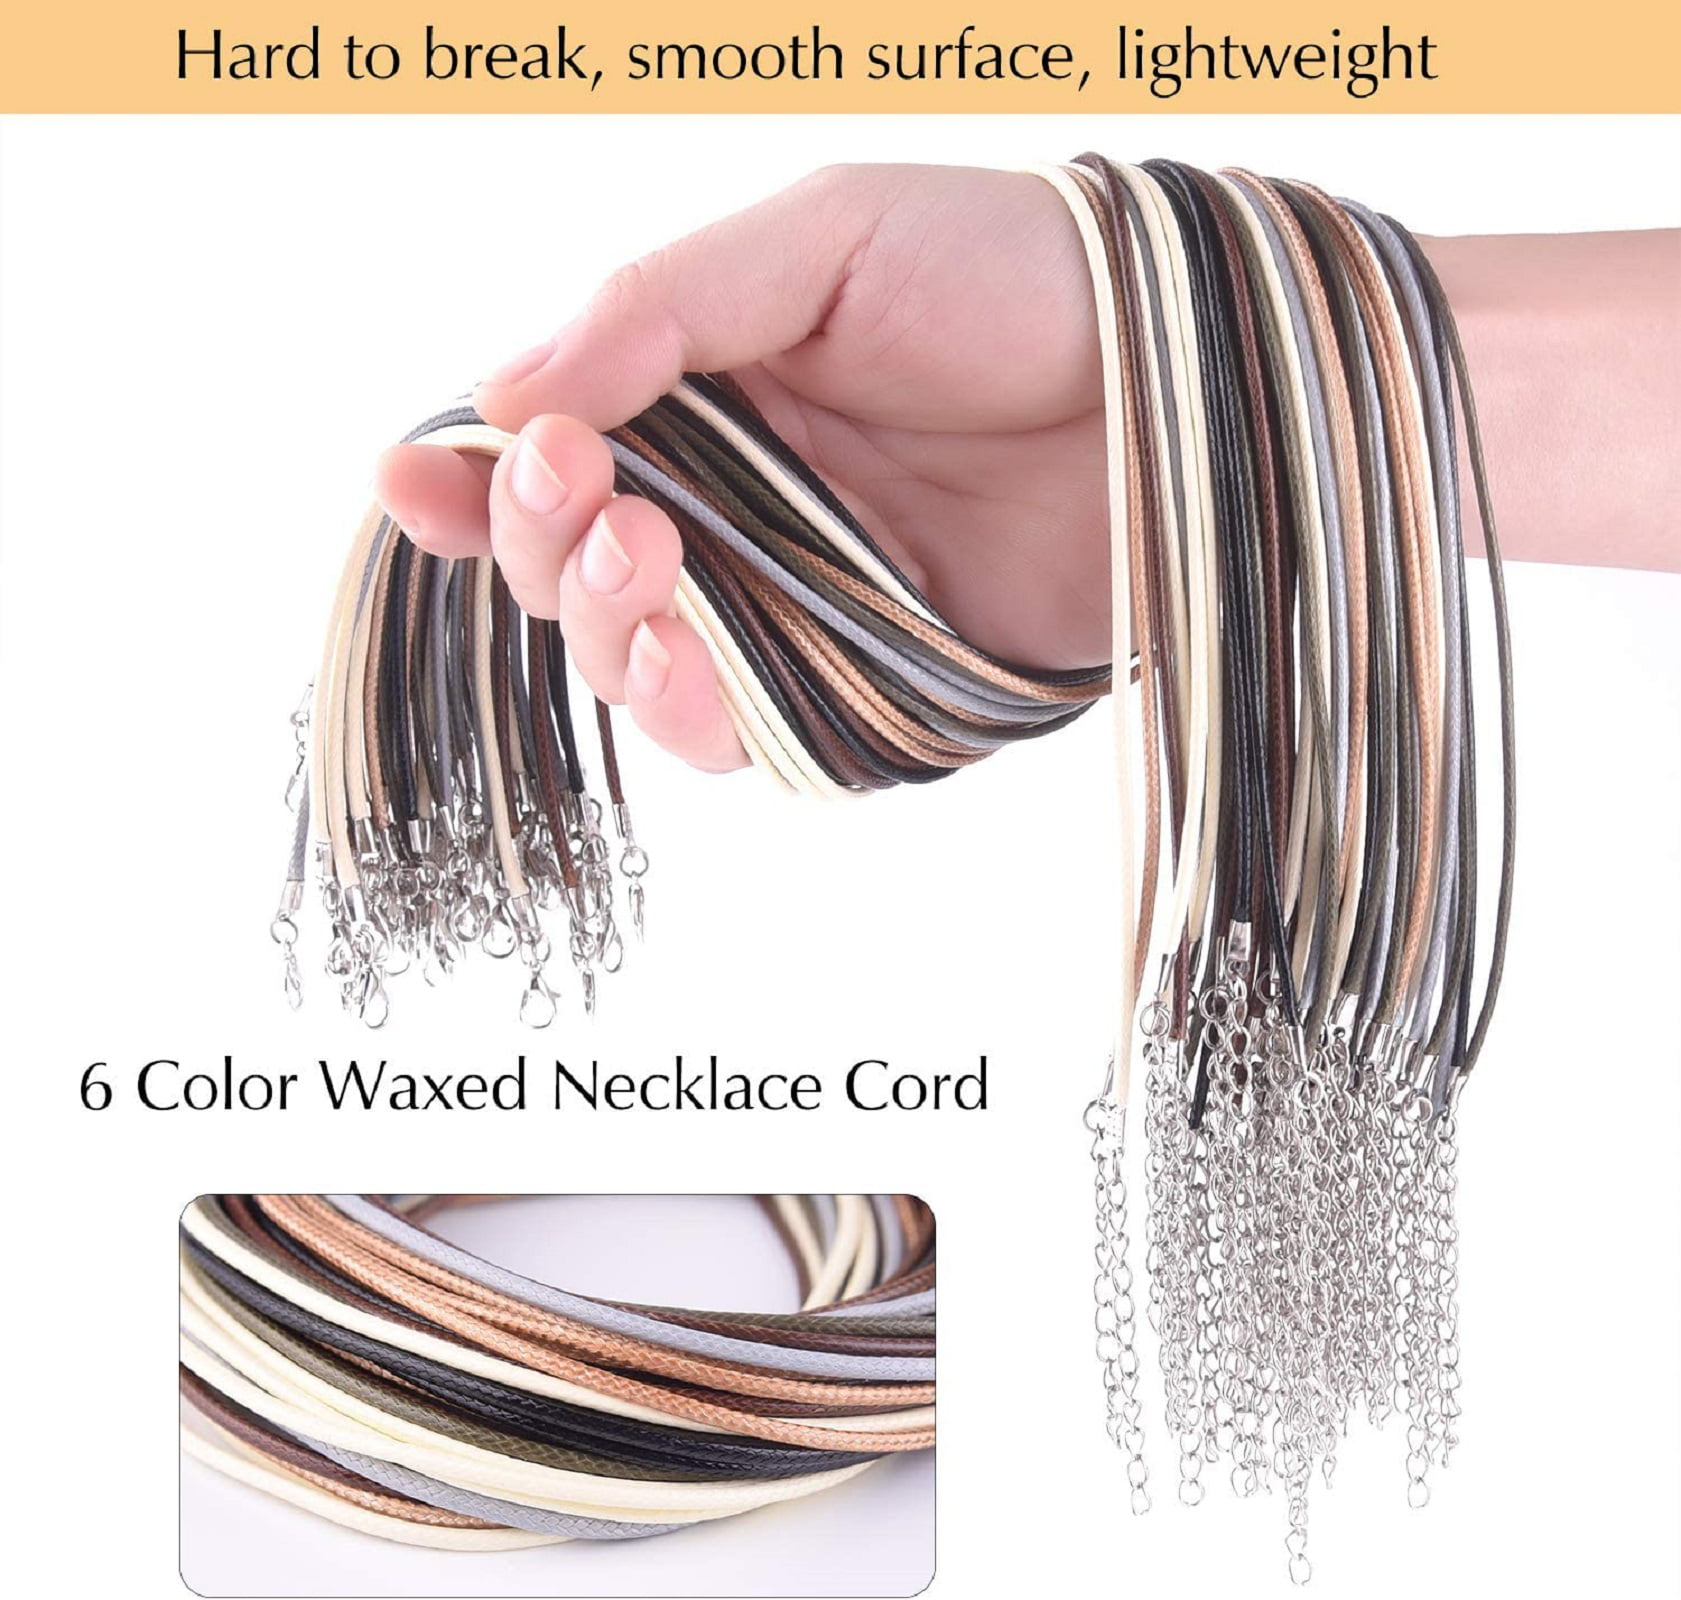  200 Pieces Waxed Necklace Cords with Clasps Bulk